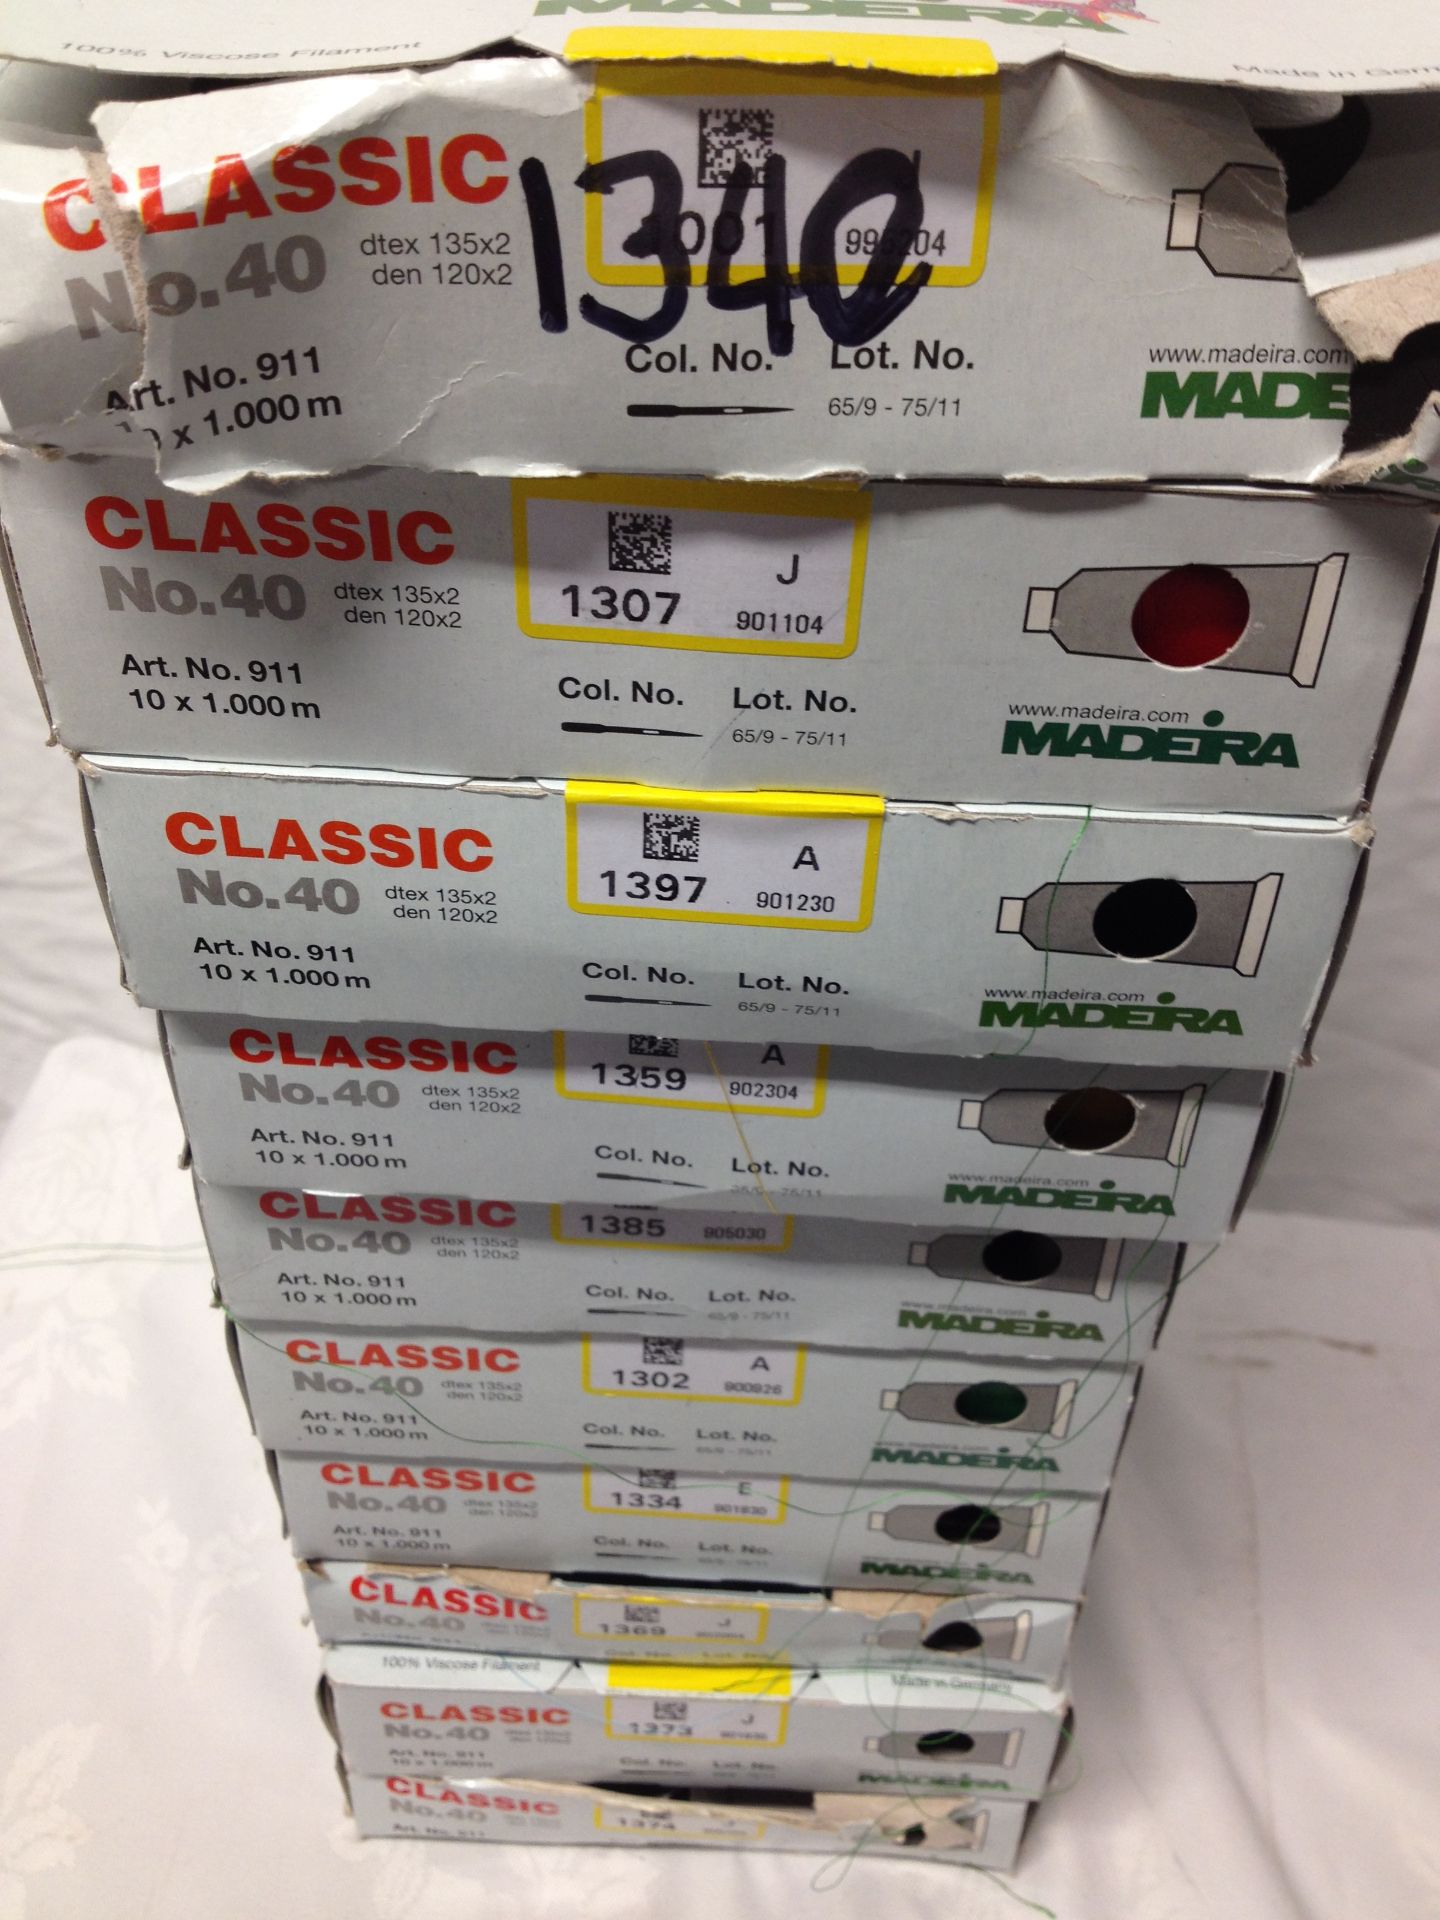 Madeira Classic 40 Viscose Embroidery Rayon x50 Boxes - Image 5 of 7